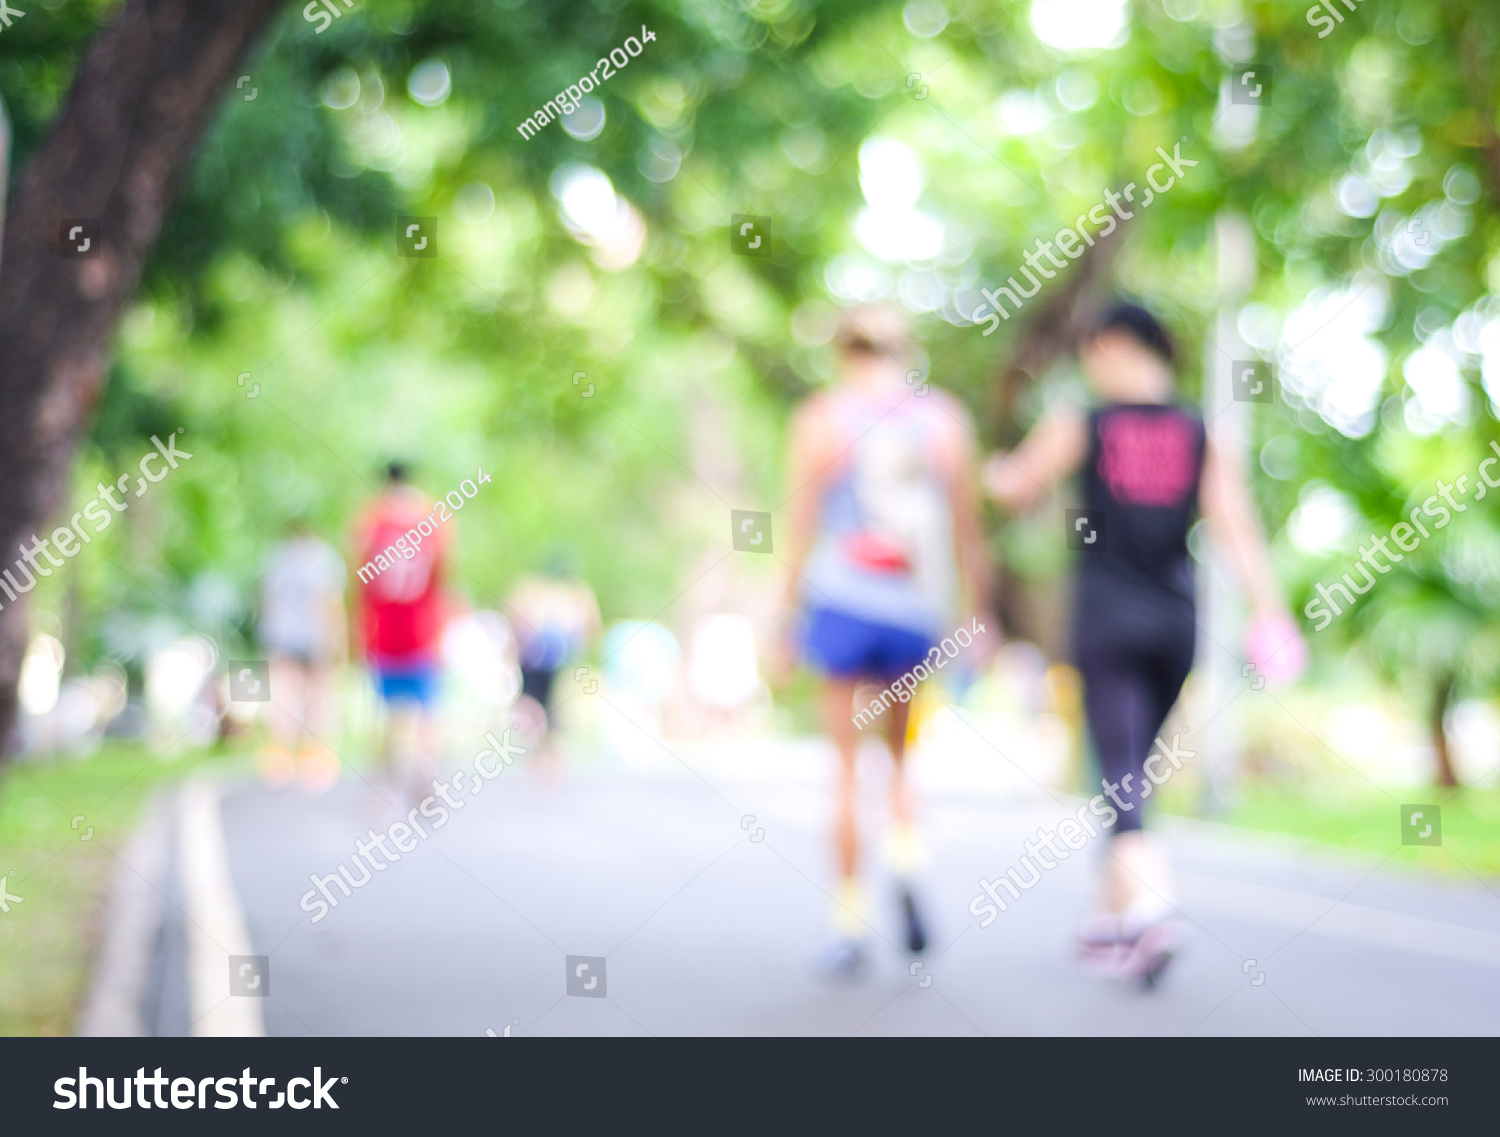 Blurred background of people activities in park with bokeh light, spring and summer #300180878